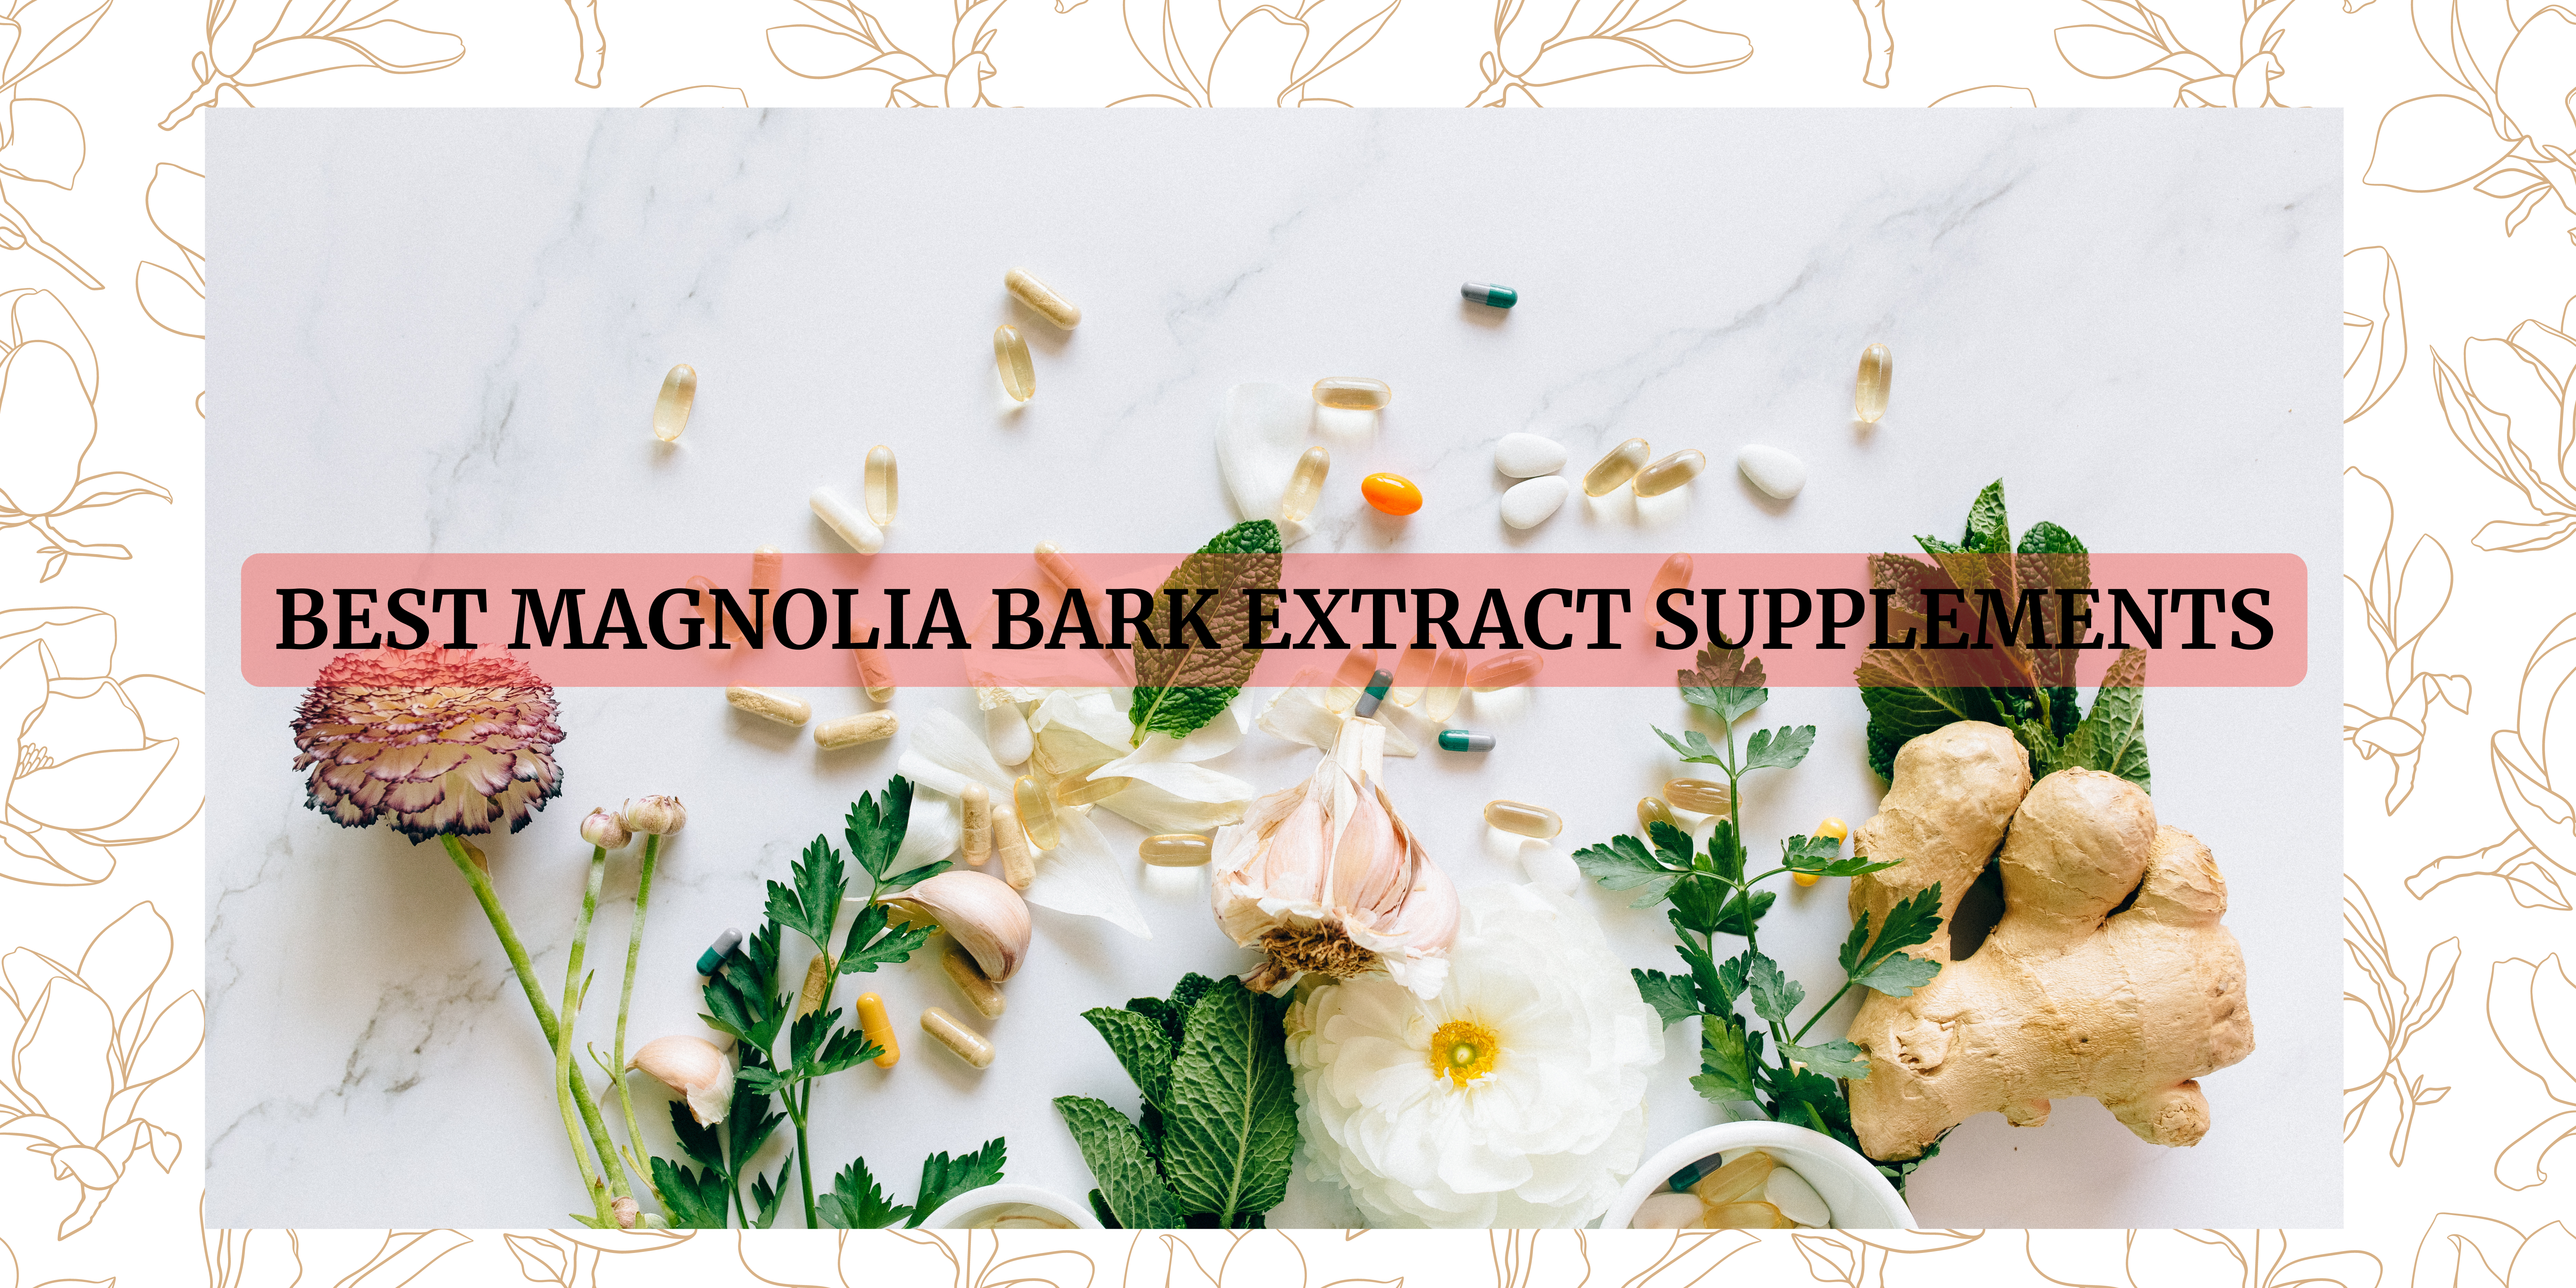 magnolia bark extract supplements in the World